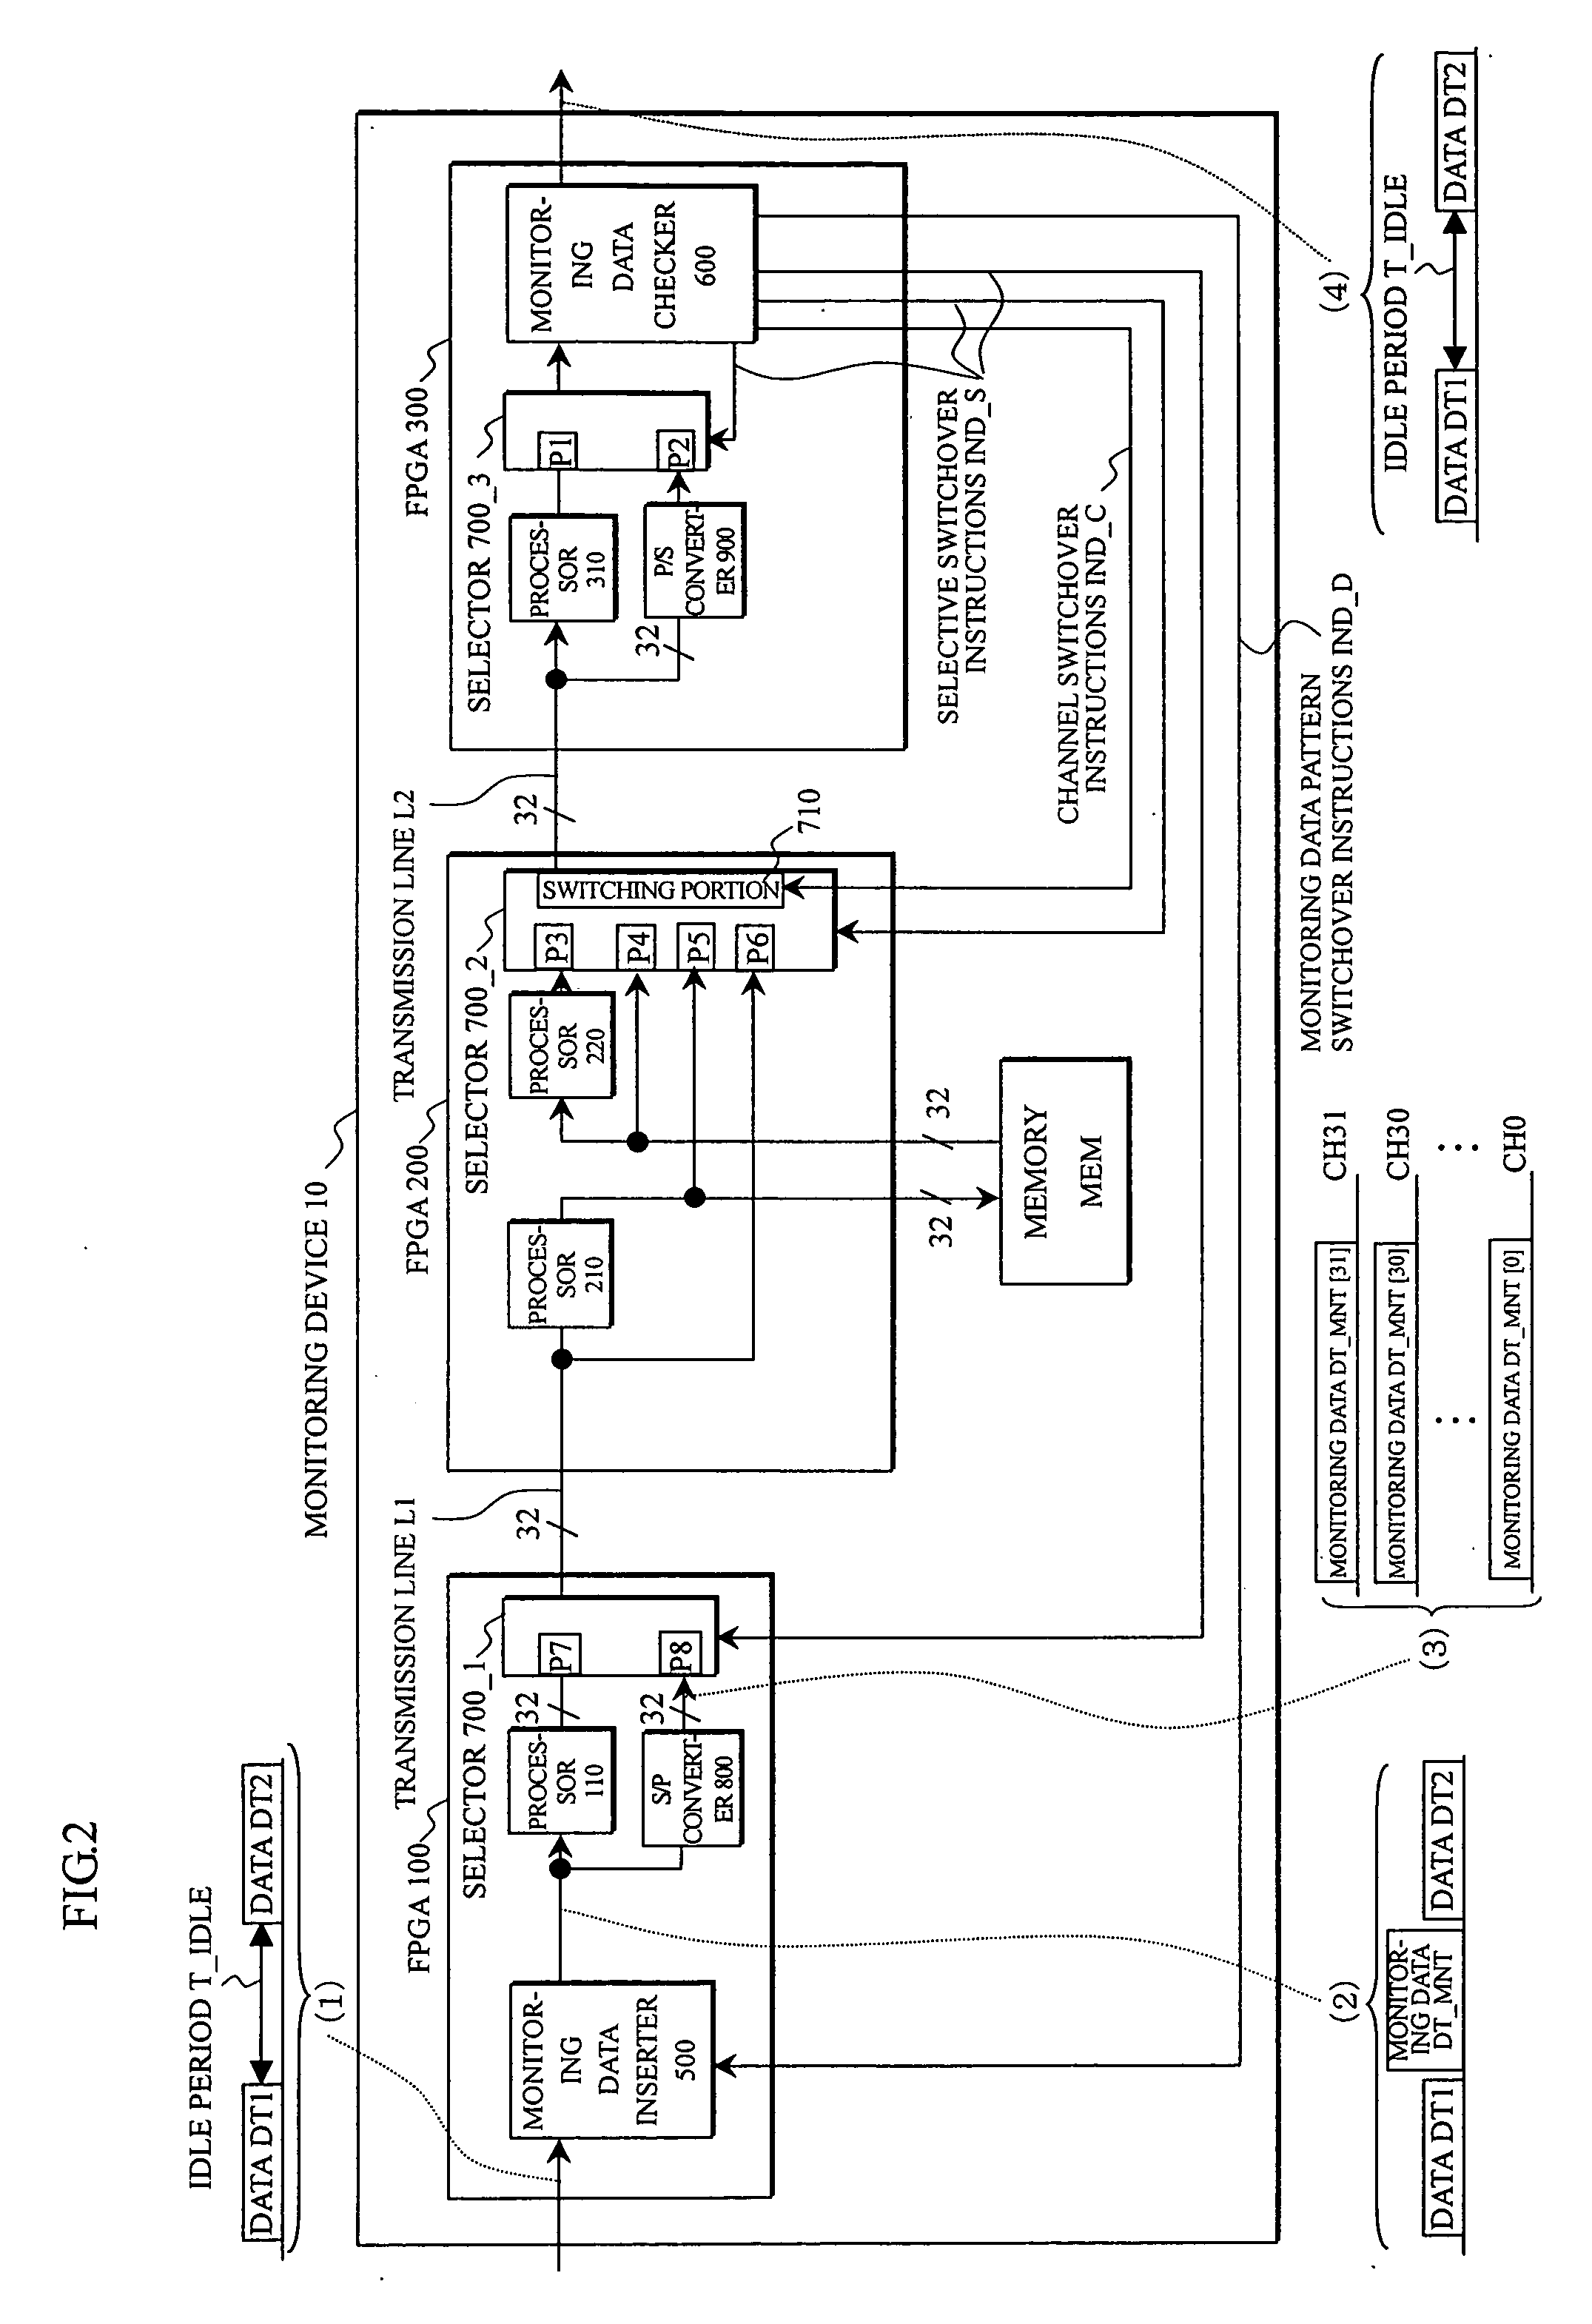 Monitoring device and system